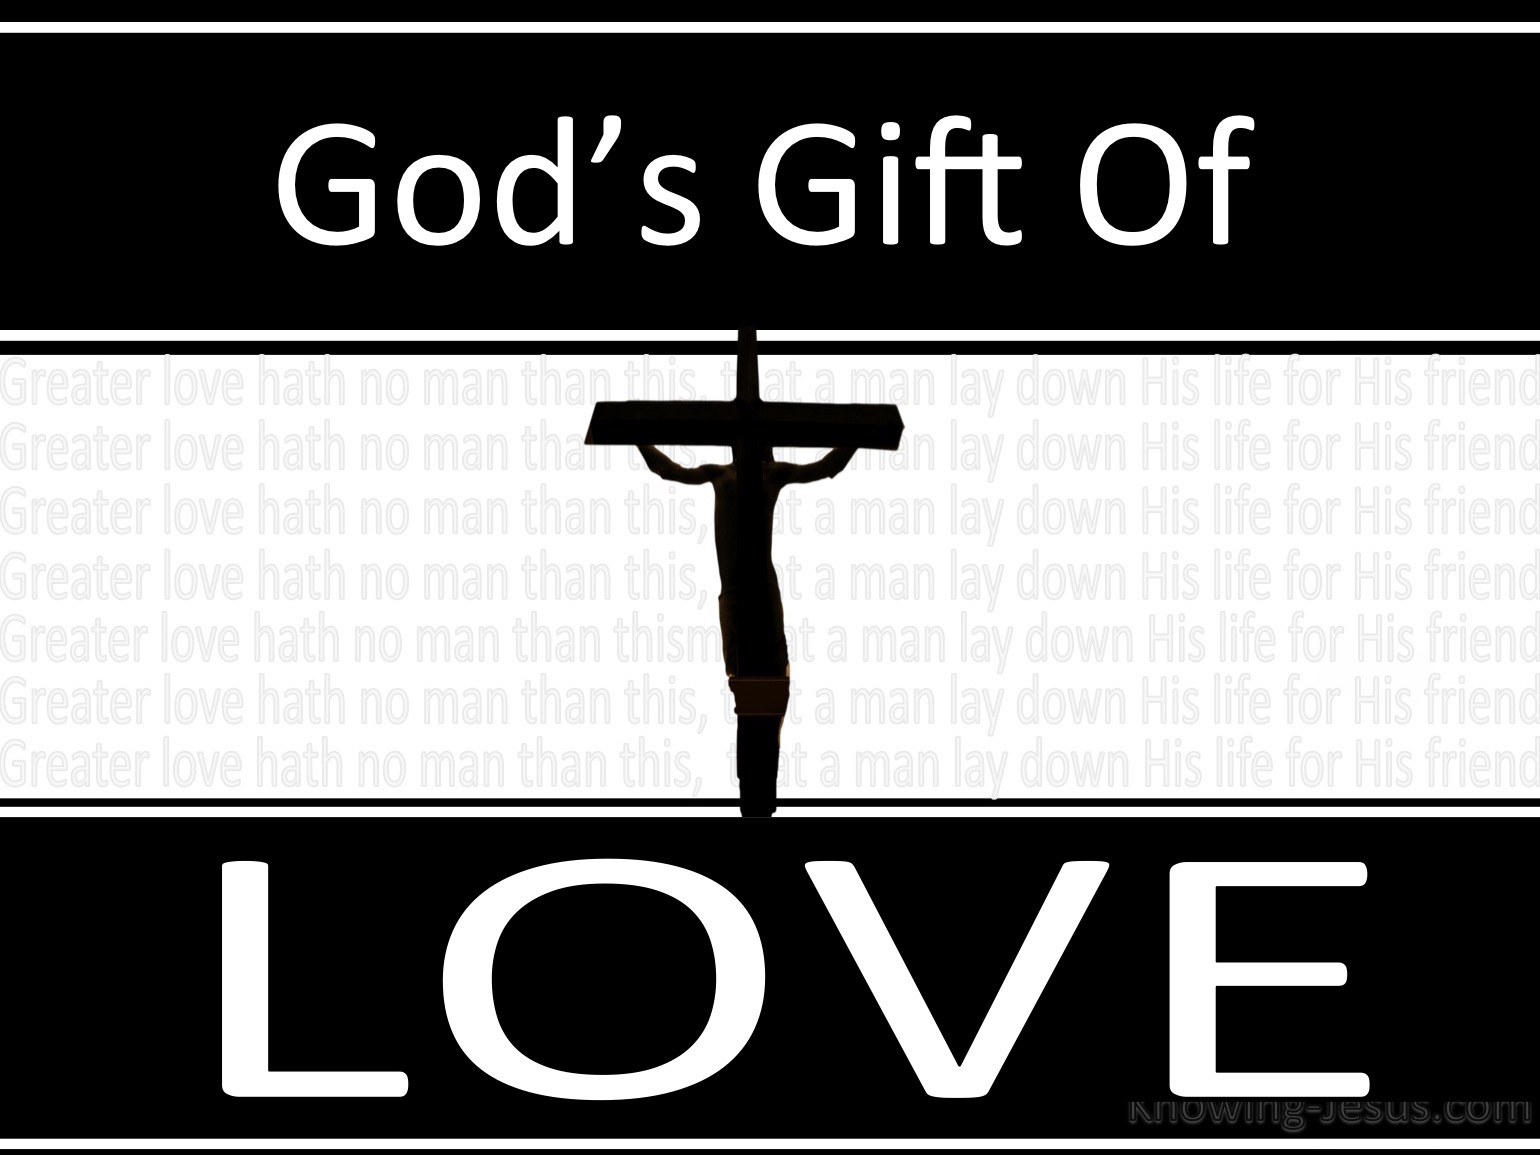 God's Gift of Love - Man's Nature and Destiny (32)